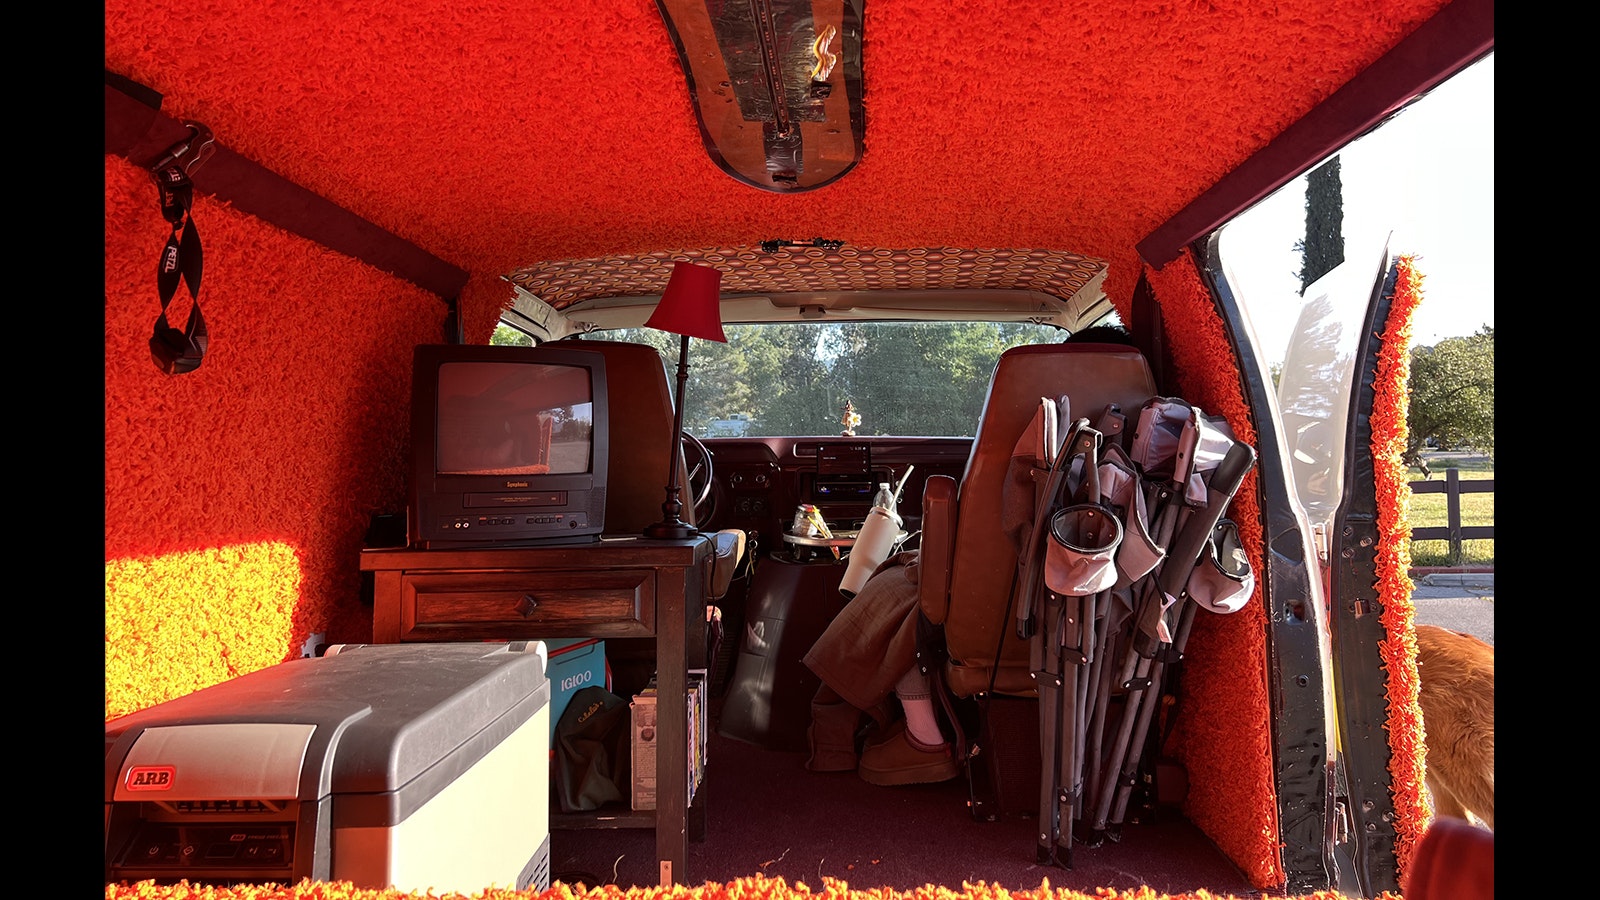 With miles of deep-pile shag carpeting, Winslow and Soumaya Bent's van could be considered a "shaggin' wagon."